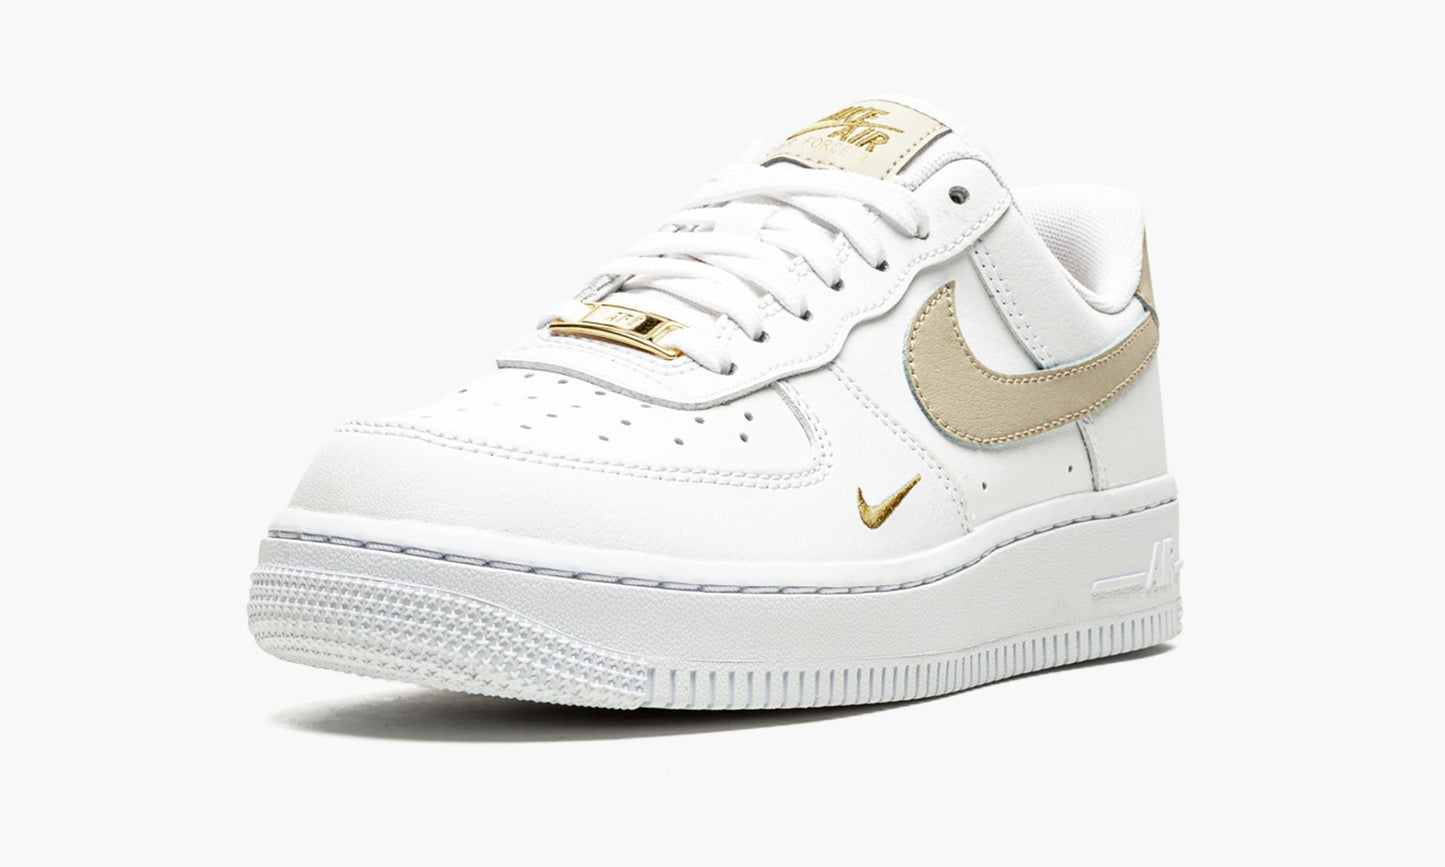 WMNS Air Force 1 Low Essential "Toe Swoosh - White / Rattan"